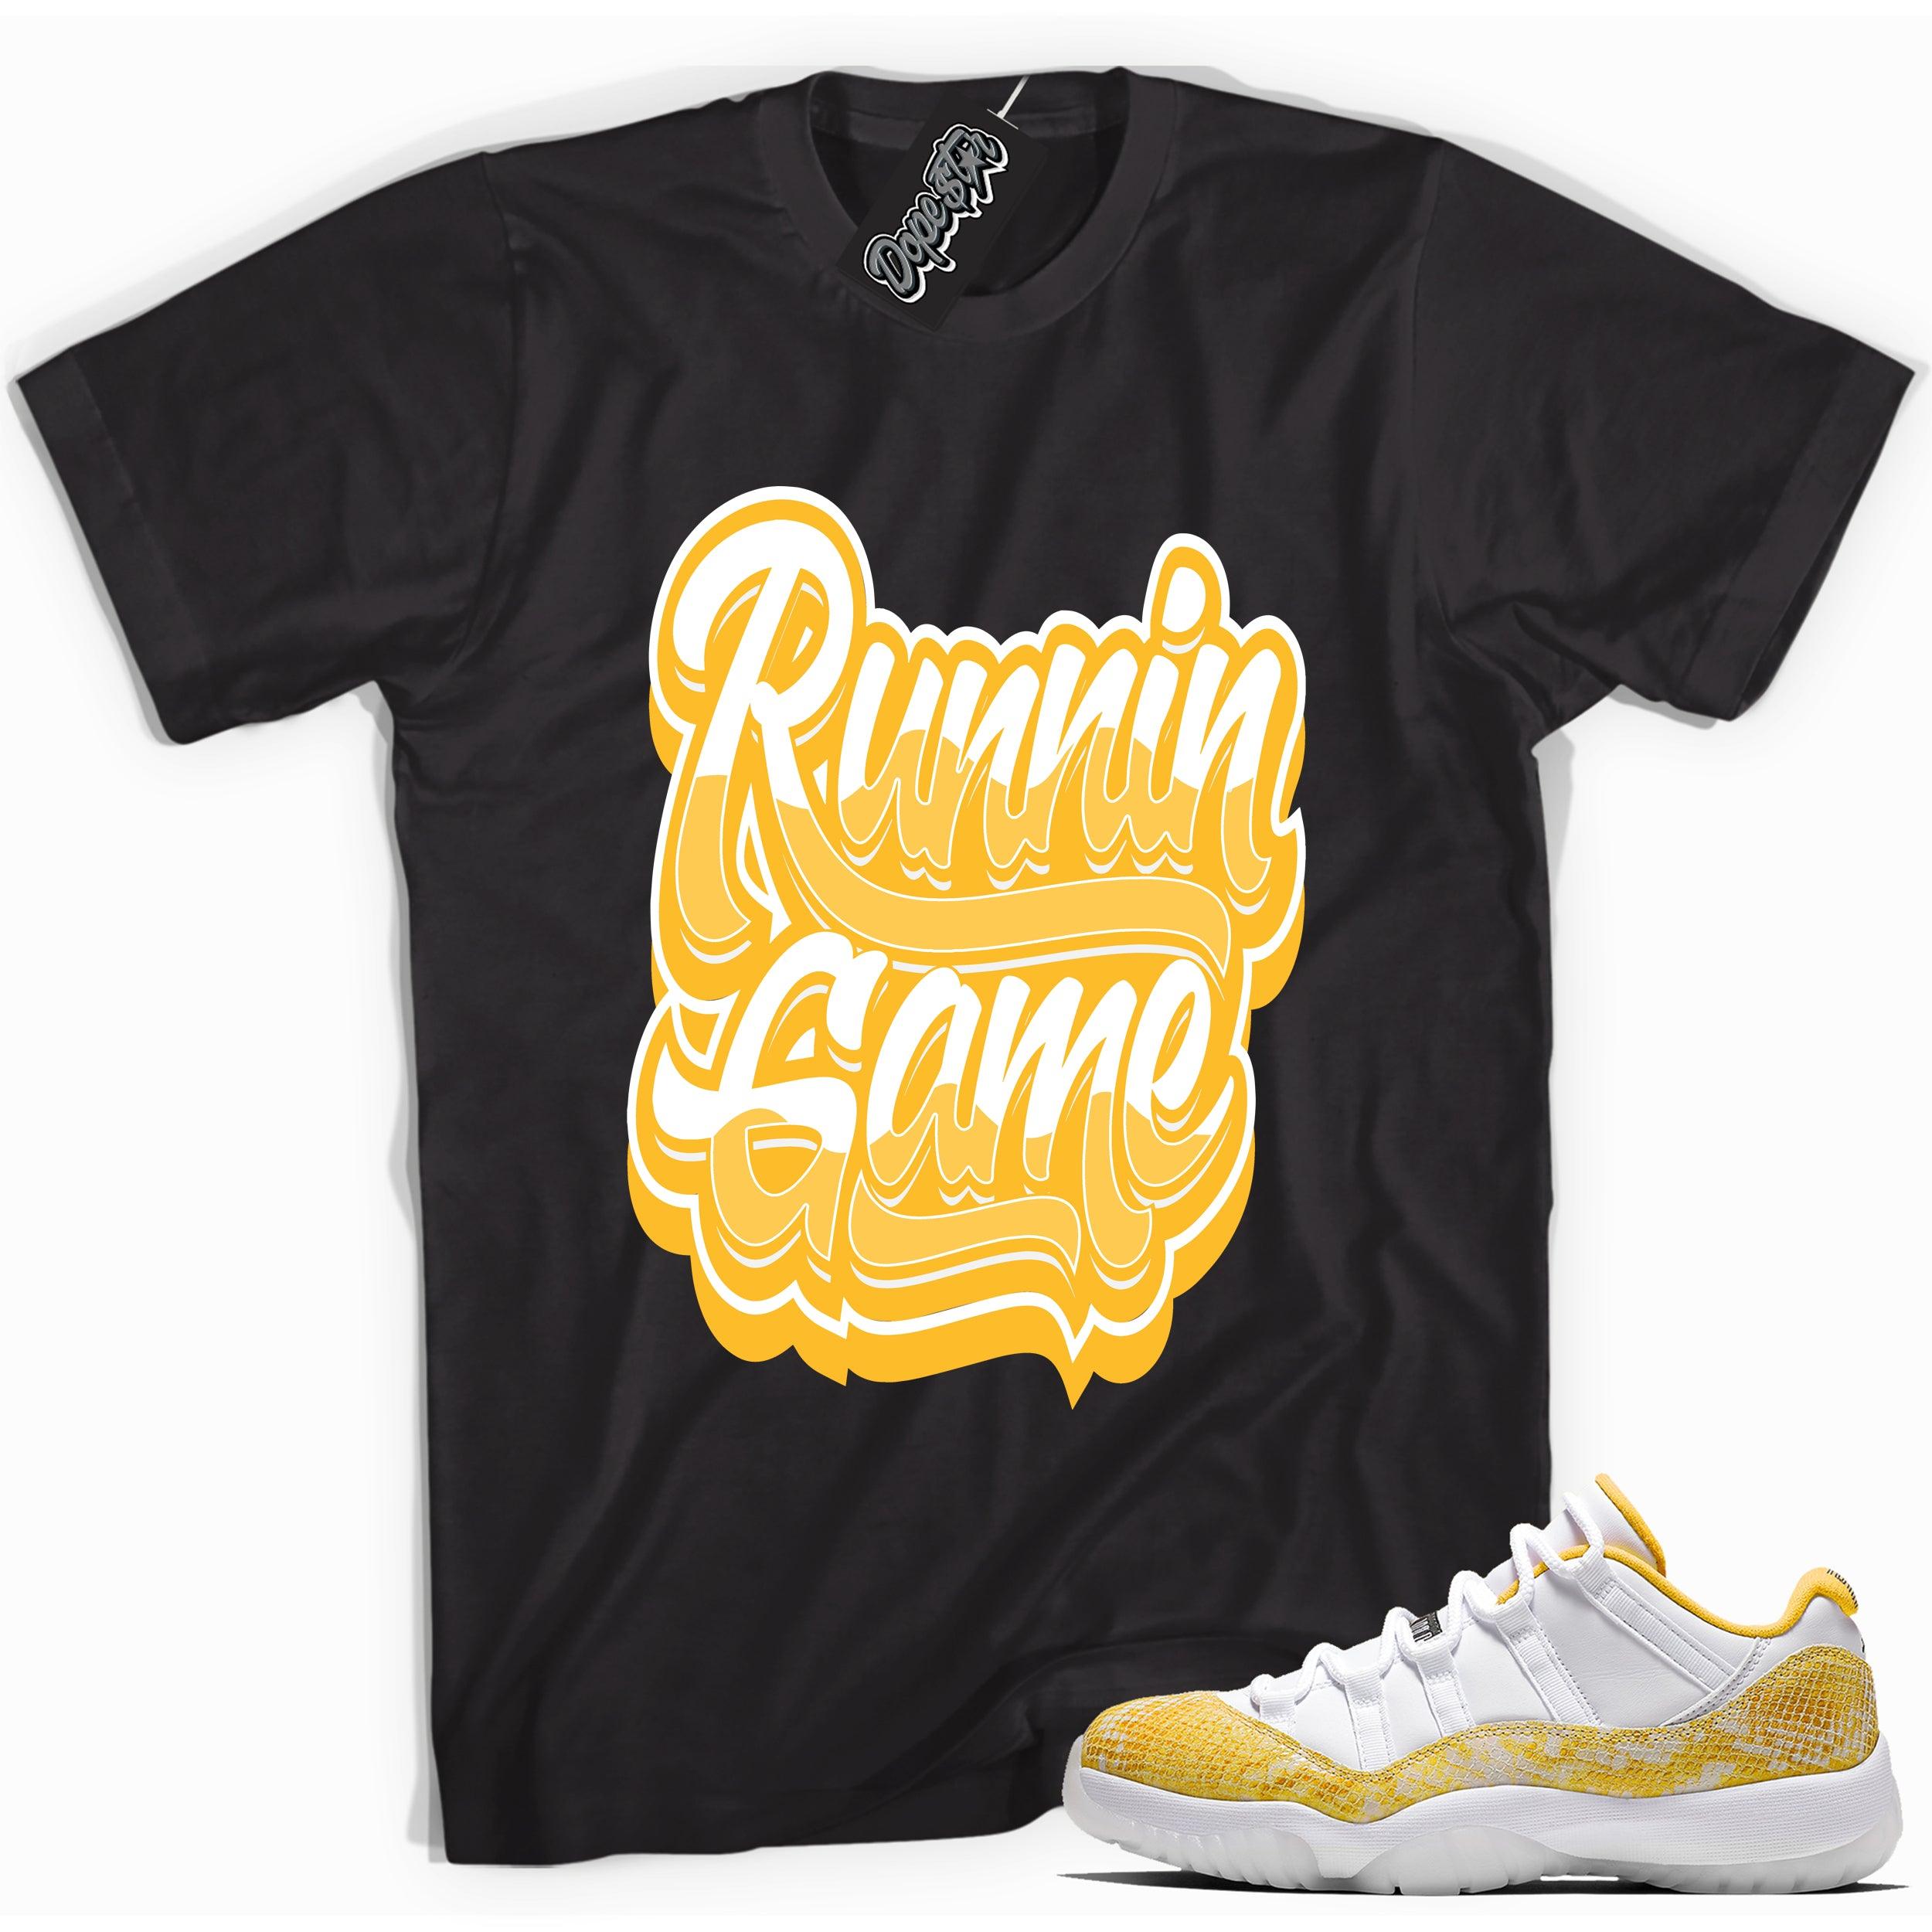 Cool black graphic tee with 'running game' print, that perfectly matches  Air Jordan 11 Retro Low Yellow Snakeskin sneakers